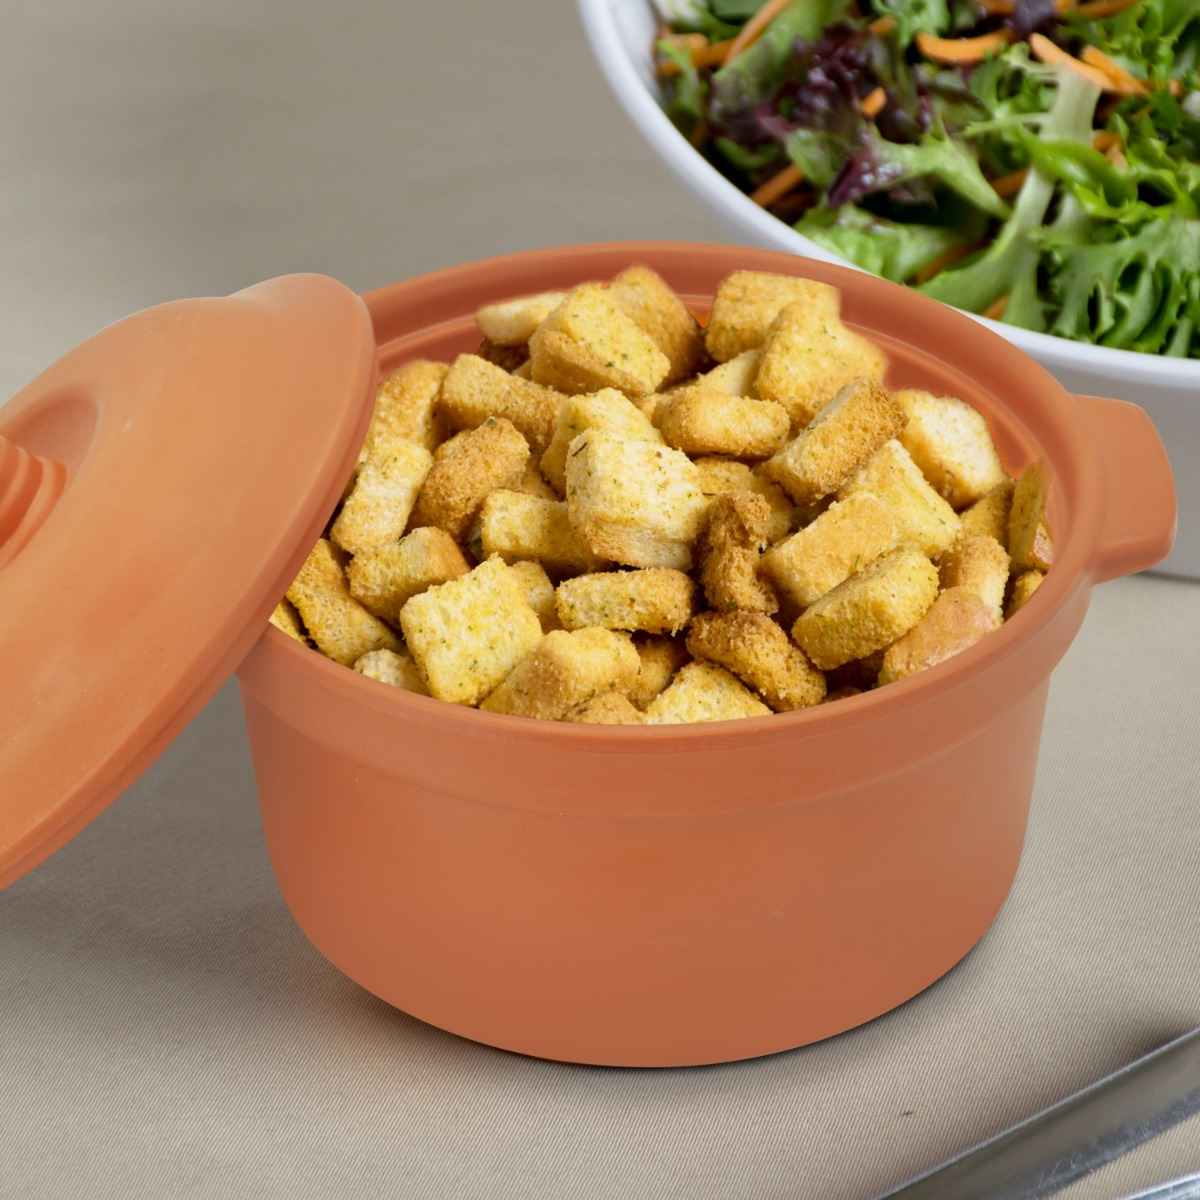 Dinewell Melamine Terracota Serving Bowl With Lid